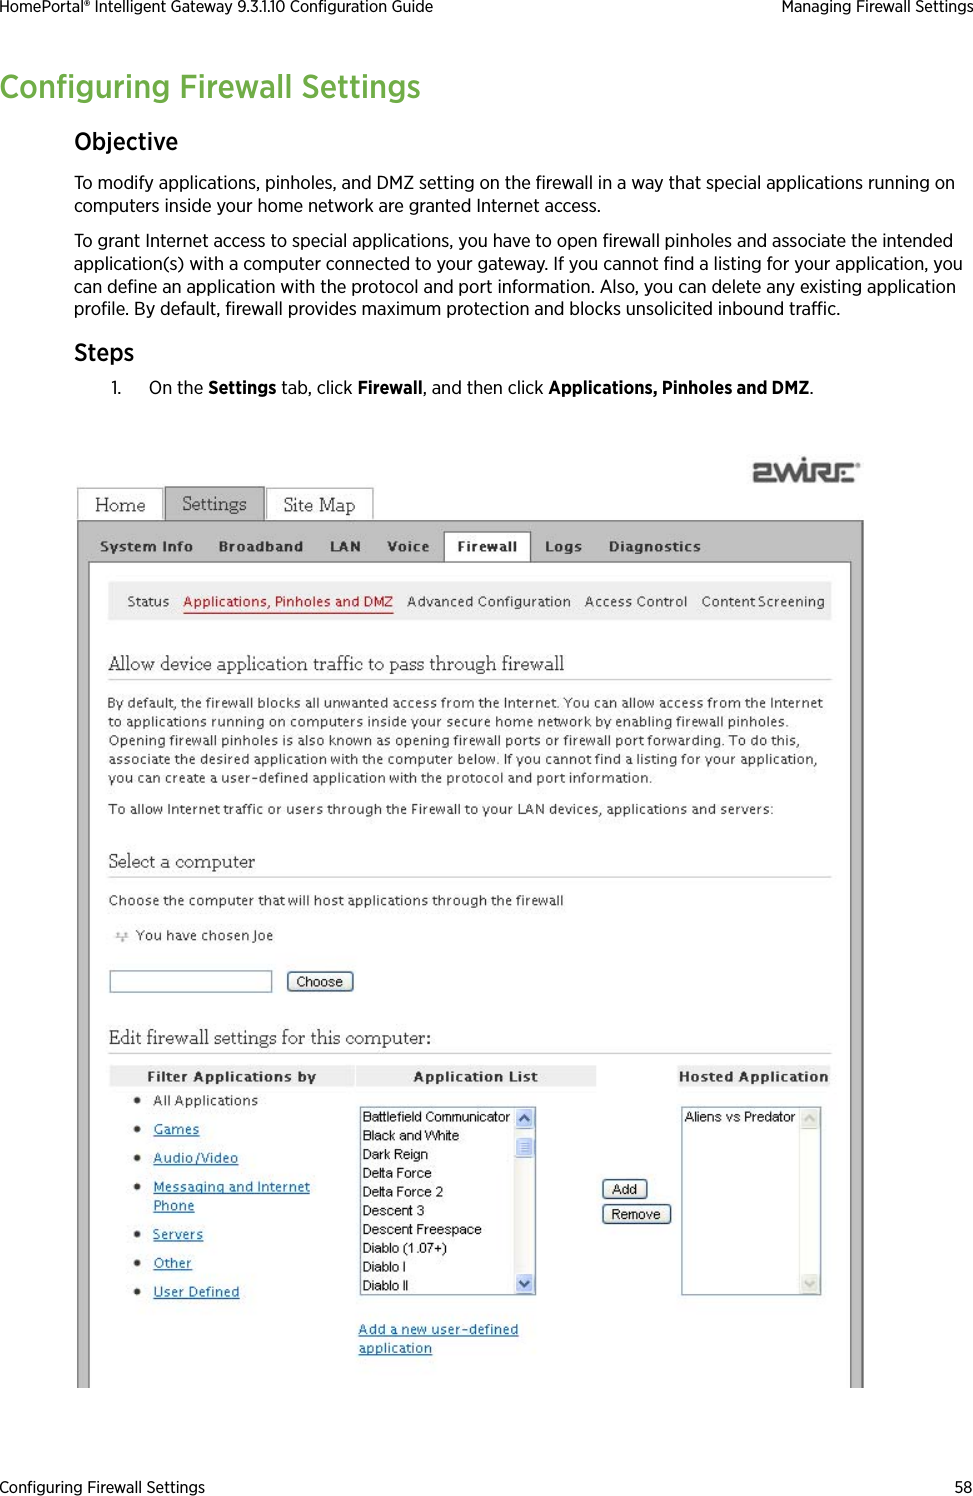 Configuring Firewall Settings 58HomePortal® Intelligent Gateway 9.3.1.10 Configuration Guide Managing Firewall SettingsConfiguring Firewall SettingsObjectiveTo modify applications, pinholes, and DMZ setting on the firewall in a way that special applications running on computers inside your home network are granted Internet access.To grant Internet access to special applications, you have to open firewall pinholes and associate the intended application(s) with a computer connected to your gateway. If you cannot find a listing for your application, you can define an application with the protocol and port information. Also, you can delete any existing application profile. By default, firewall provides maximum protection and blocks unsolicited inbound traffic.Steps1. On the Settings tab, click Firewall, and then click Applications, Pinholes and DMZ.